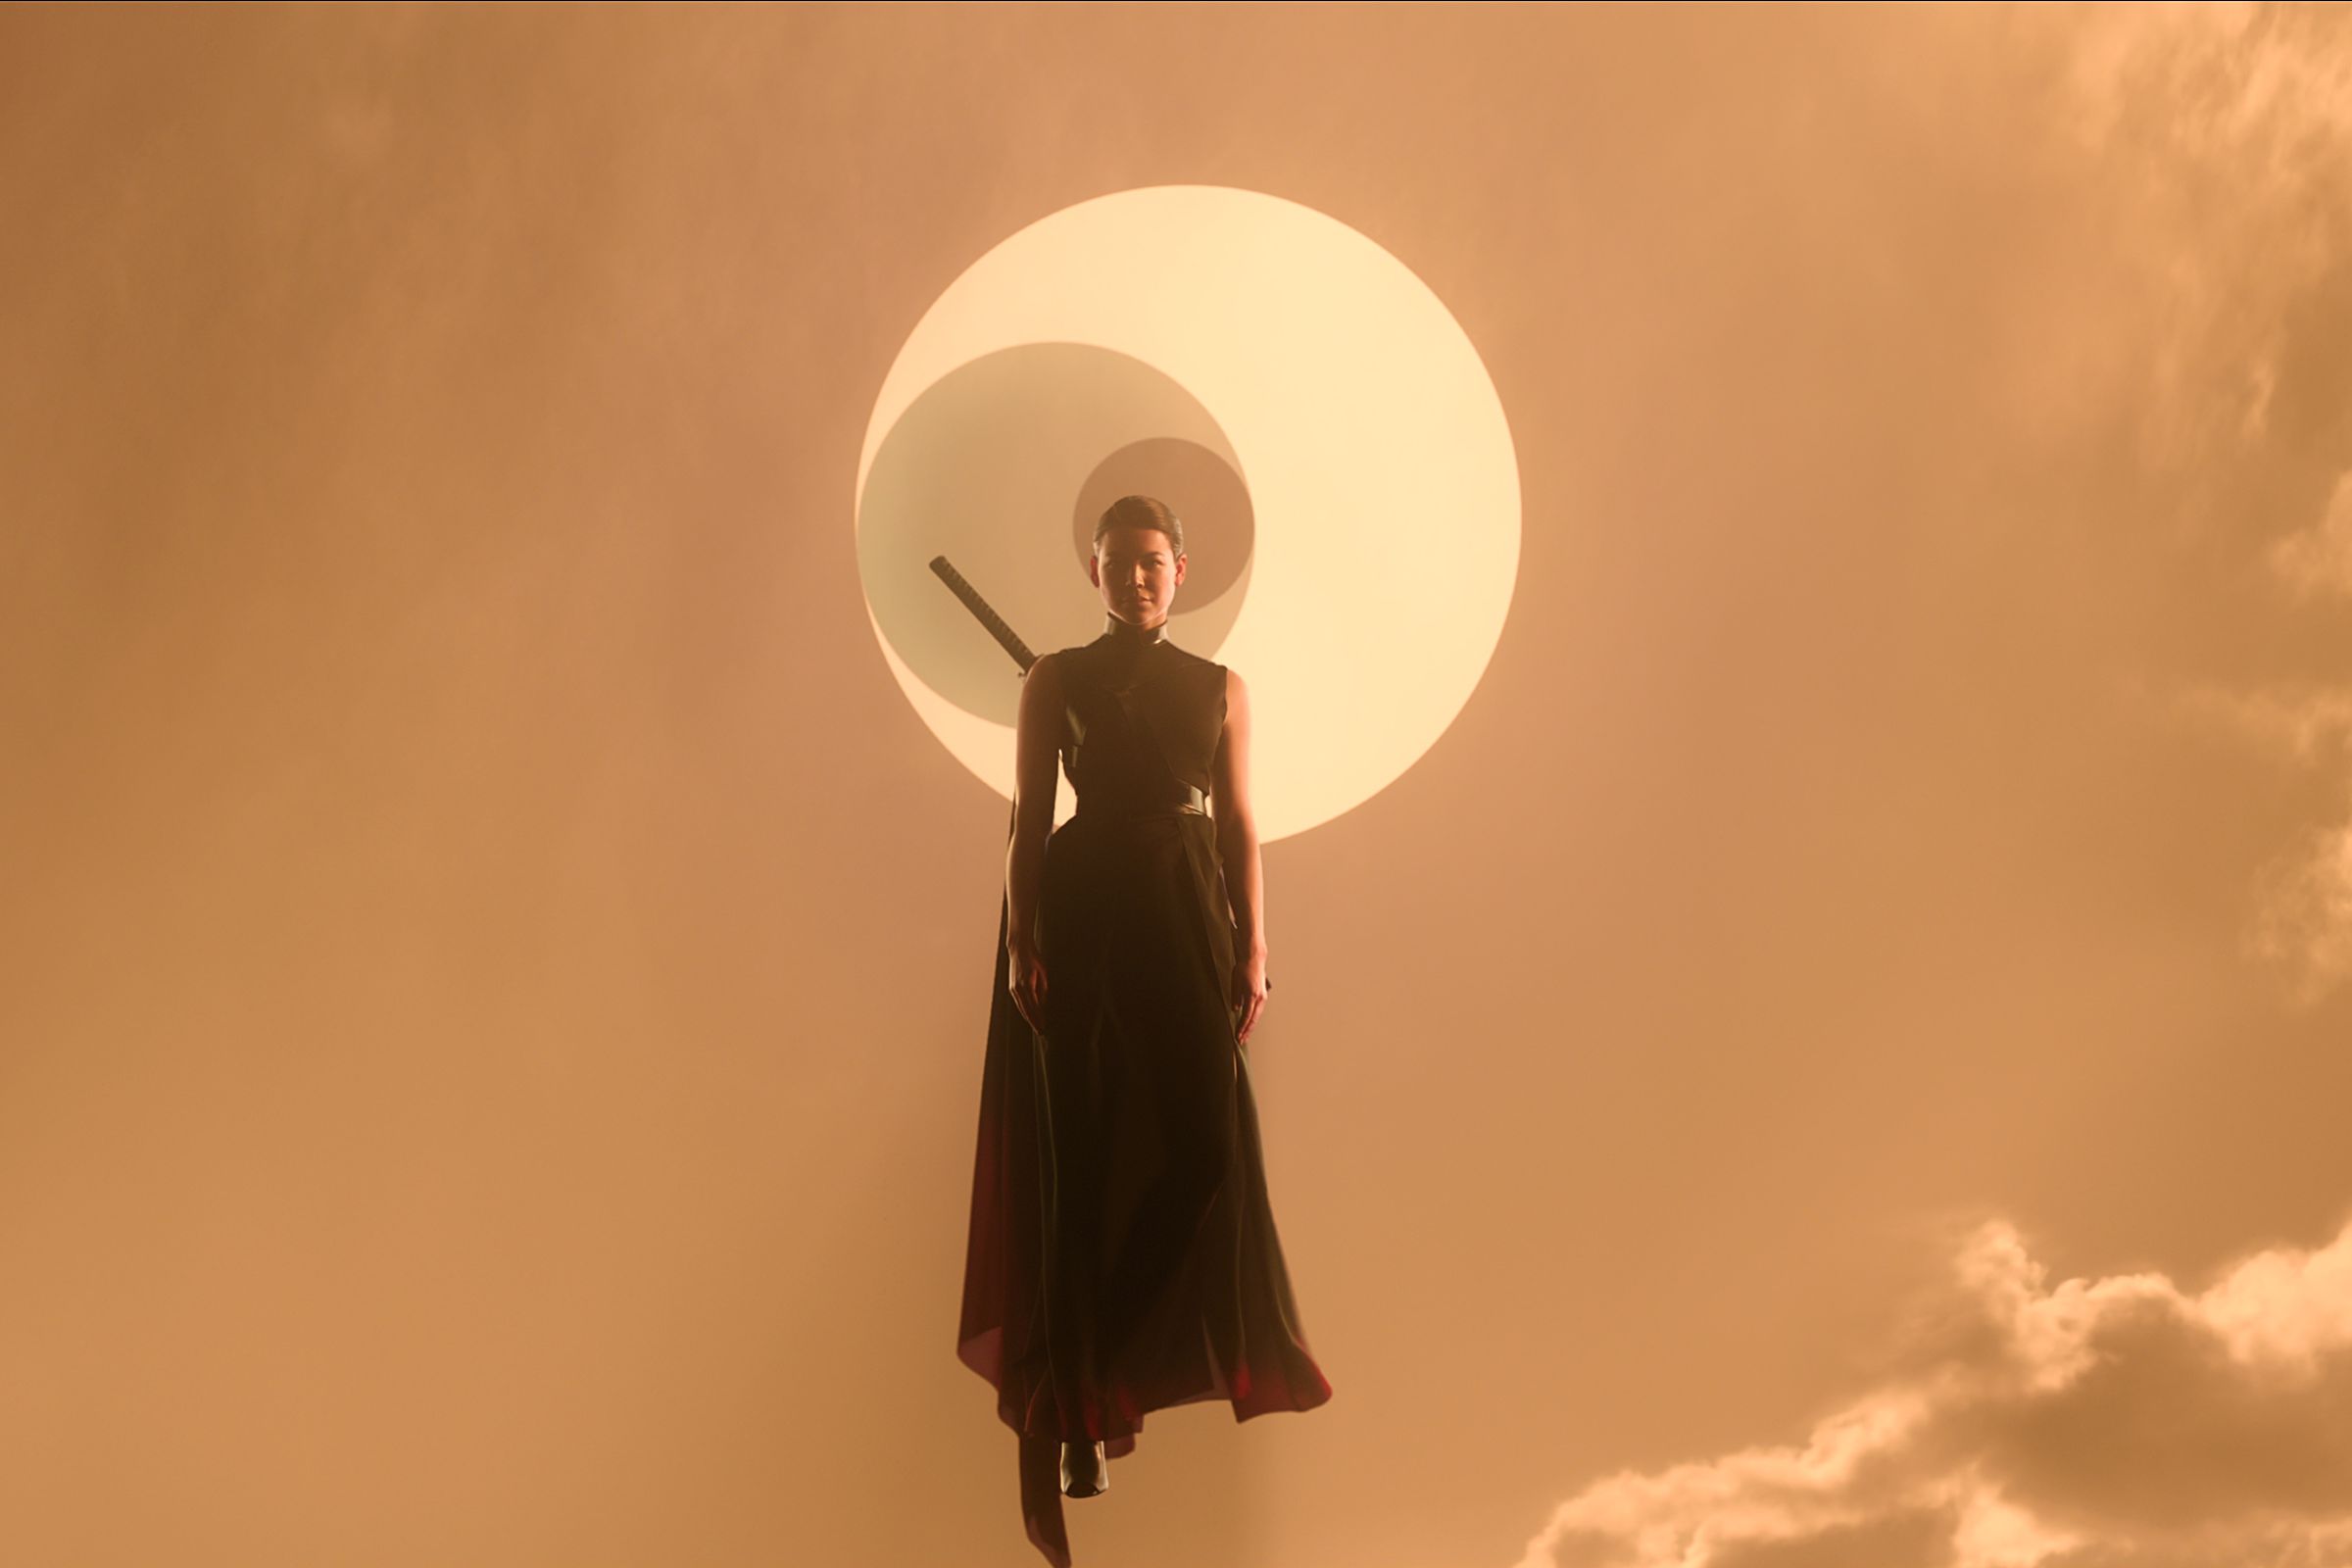 A woman in a form-fitting, sleeveless back outfit accented with a flowing black cape and a sheathed sword on her back. The woman is floating into a pale rust-colored sky in which the sun is being eclipsed by two smaller celestial bodies.